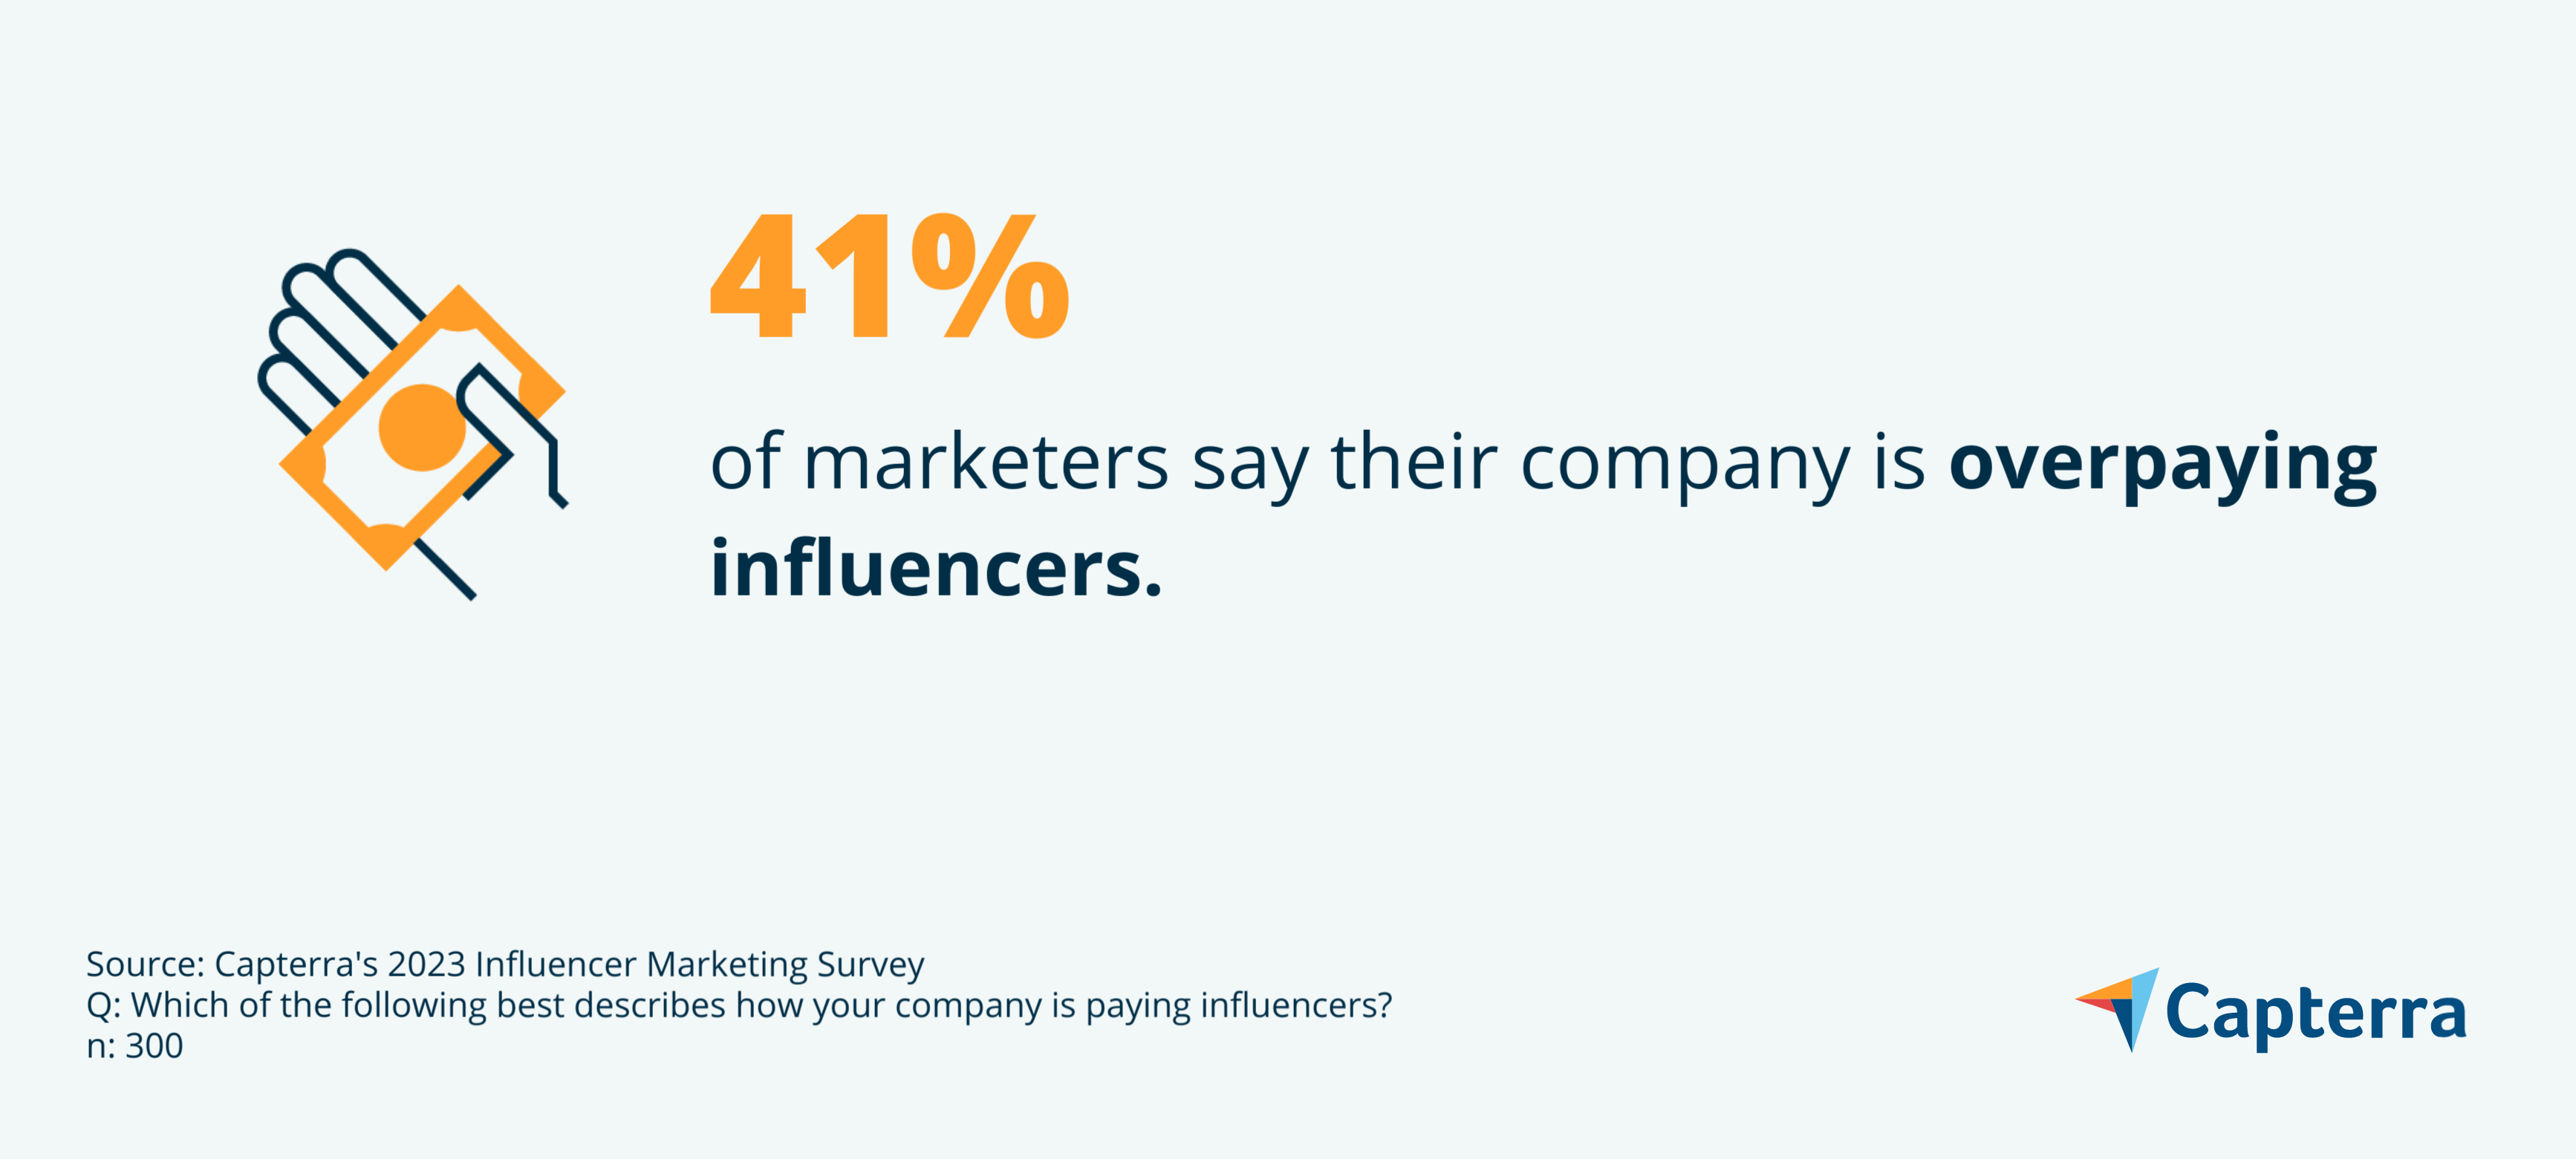 Overpaying influencers graphic for the blog article "How to Navigate Influencer Payment Ambiguity"